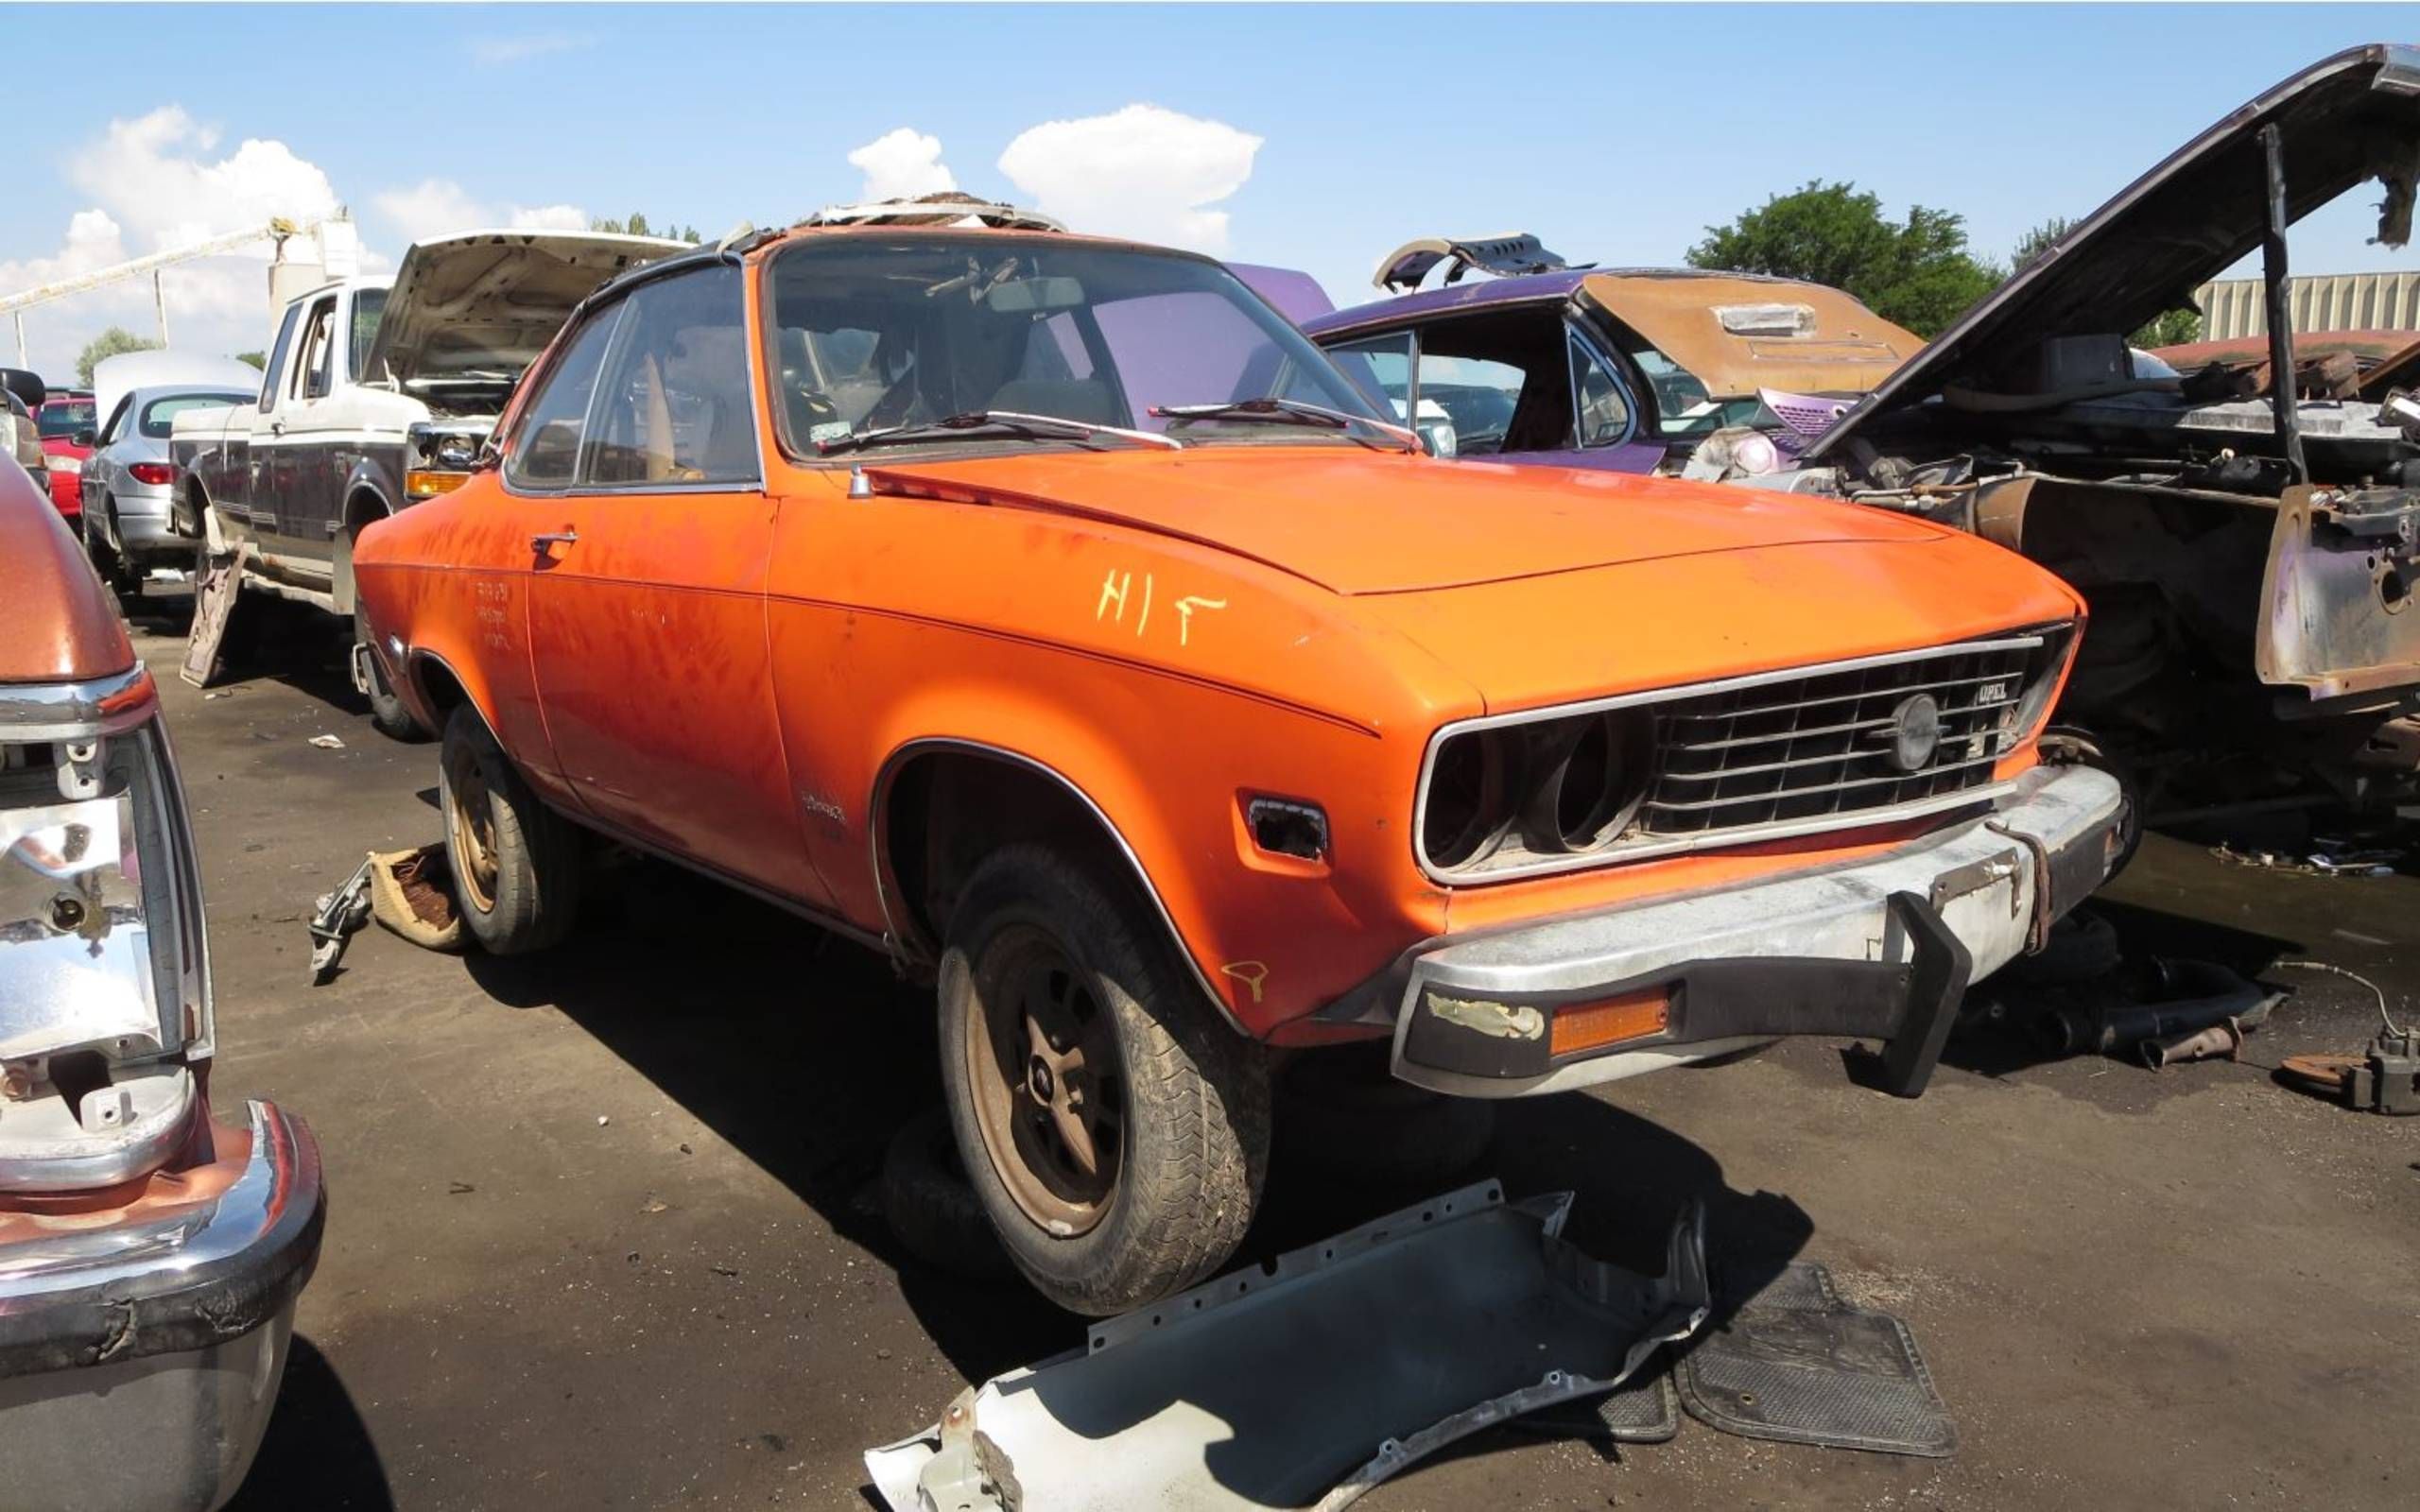 Curbside Classic: 1975 Opel Manta 3100 (That's Not A Typo) - The